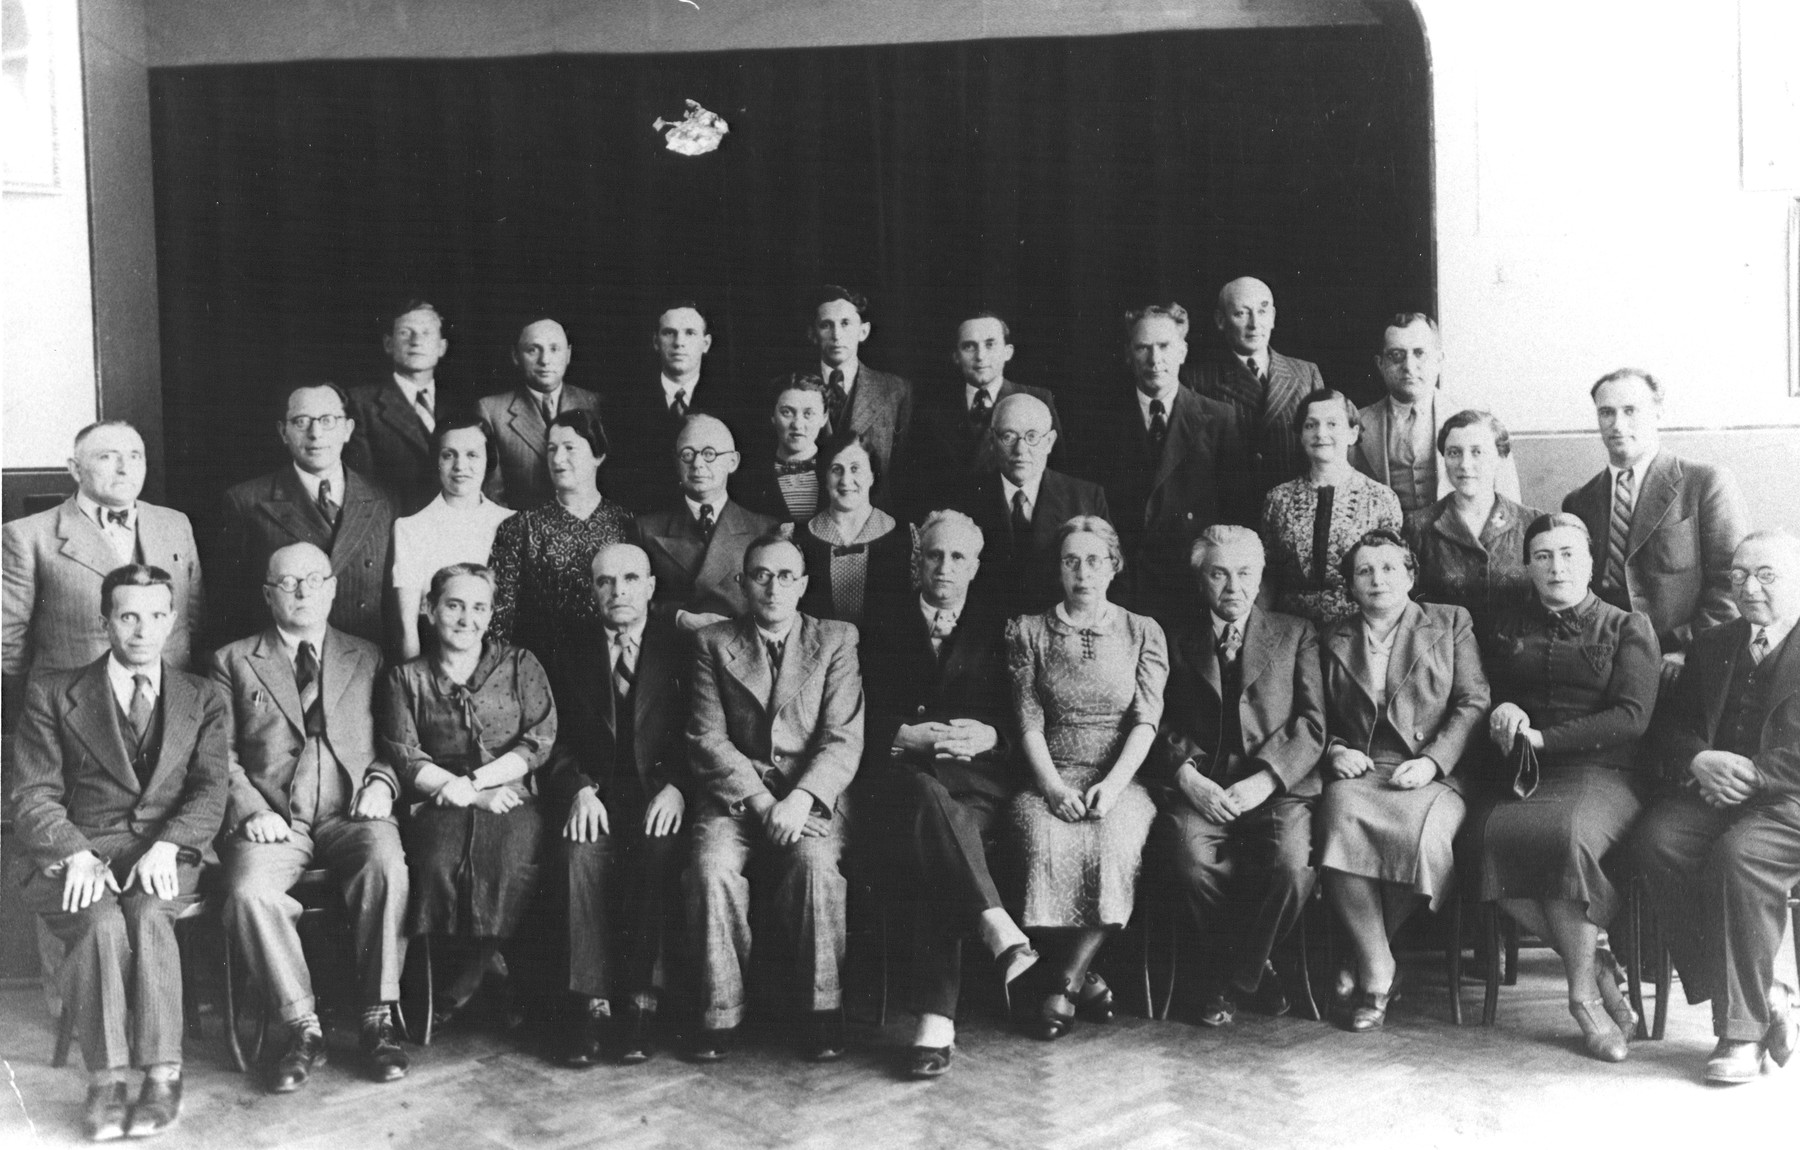 Group portrait of the faculty of the Hebrew Real Gymnasium in Kovno, Lithuania.

Seated in the center is the pricipal, front row (fifth from left) is the principal Dr. Kissin.  Standing in the top row on the far right is Shalom Tzvi Rachokovsky.